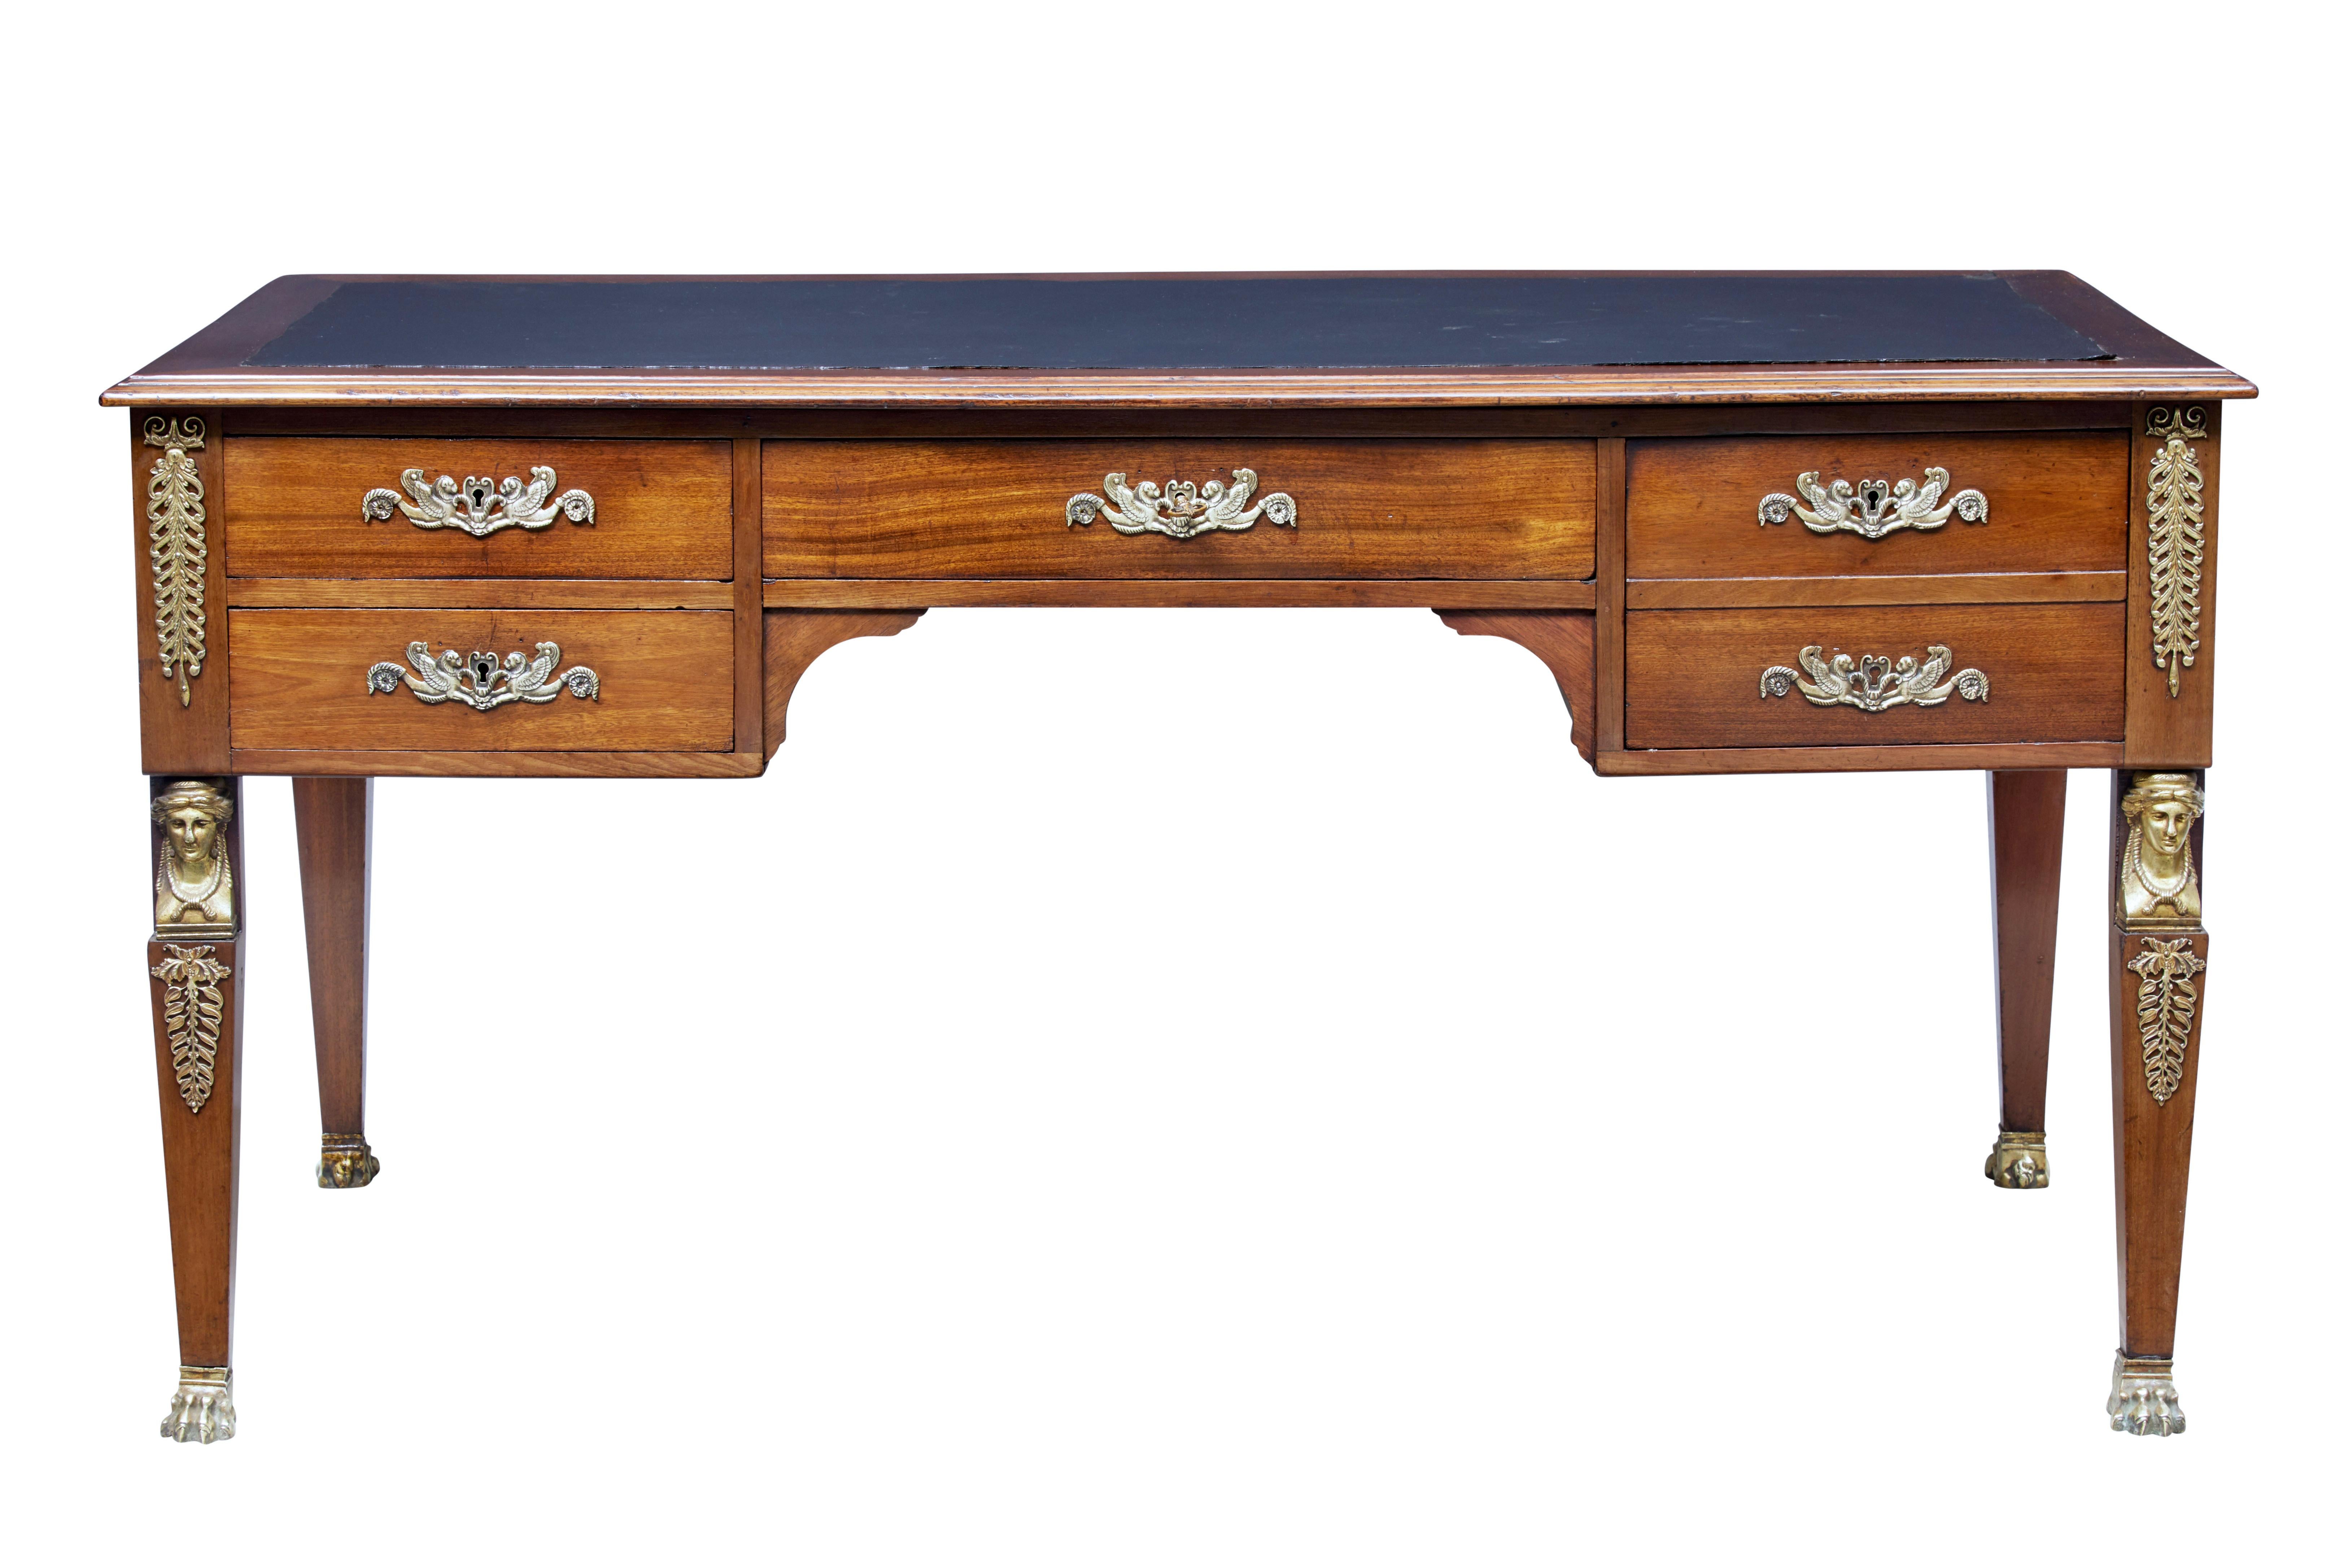 Large mahogany French Empire desk, circa 1890.

Simple elegant freestanding desk adorned with ormolu mounts. 1 drawer above the knee and 2 drawers either side which open on the key. Reverse side with dummy drawers and further mounts. Egyptian